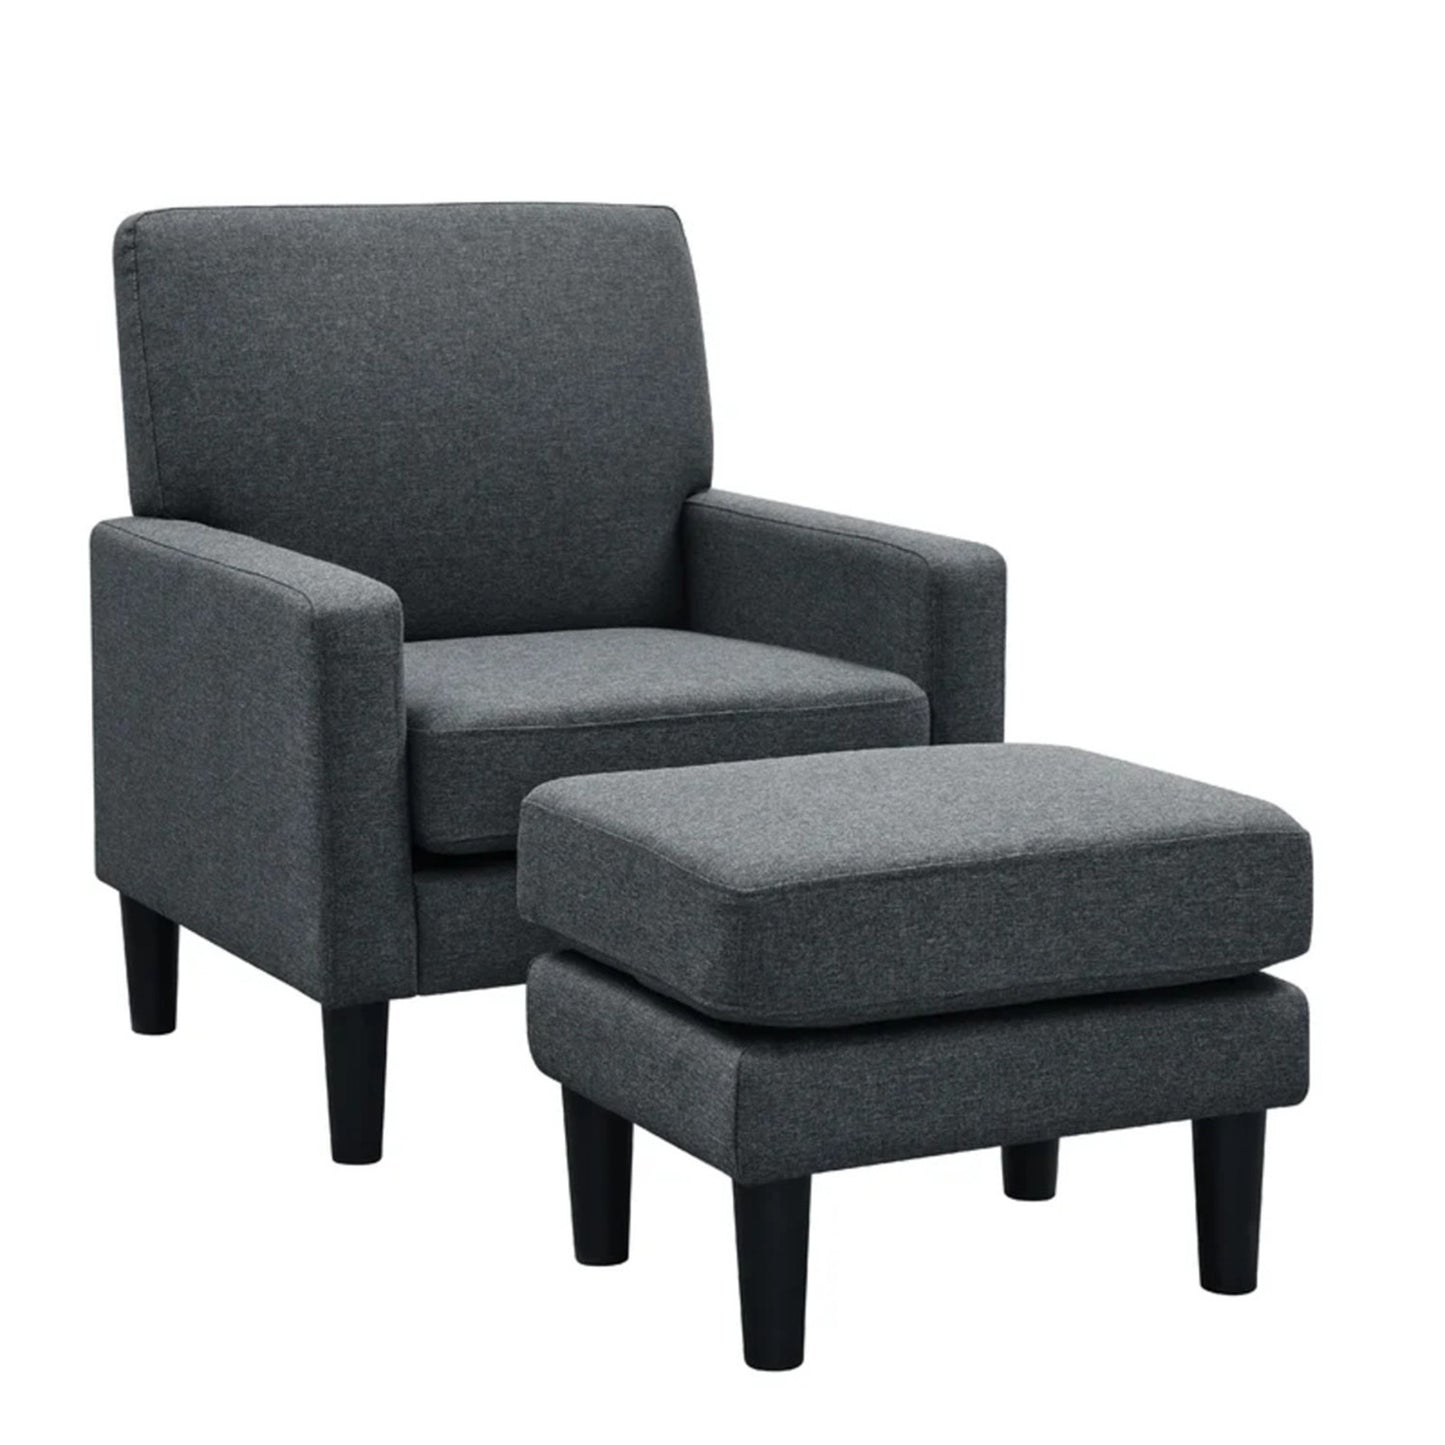 Opulent Accent Chairs With Ottoman Footrest Grey